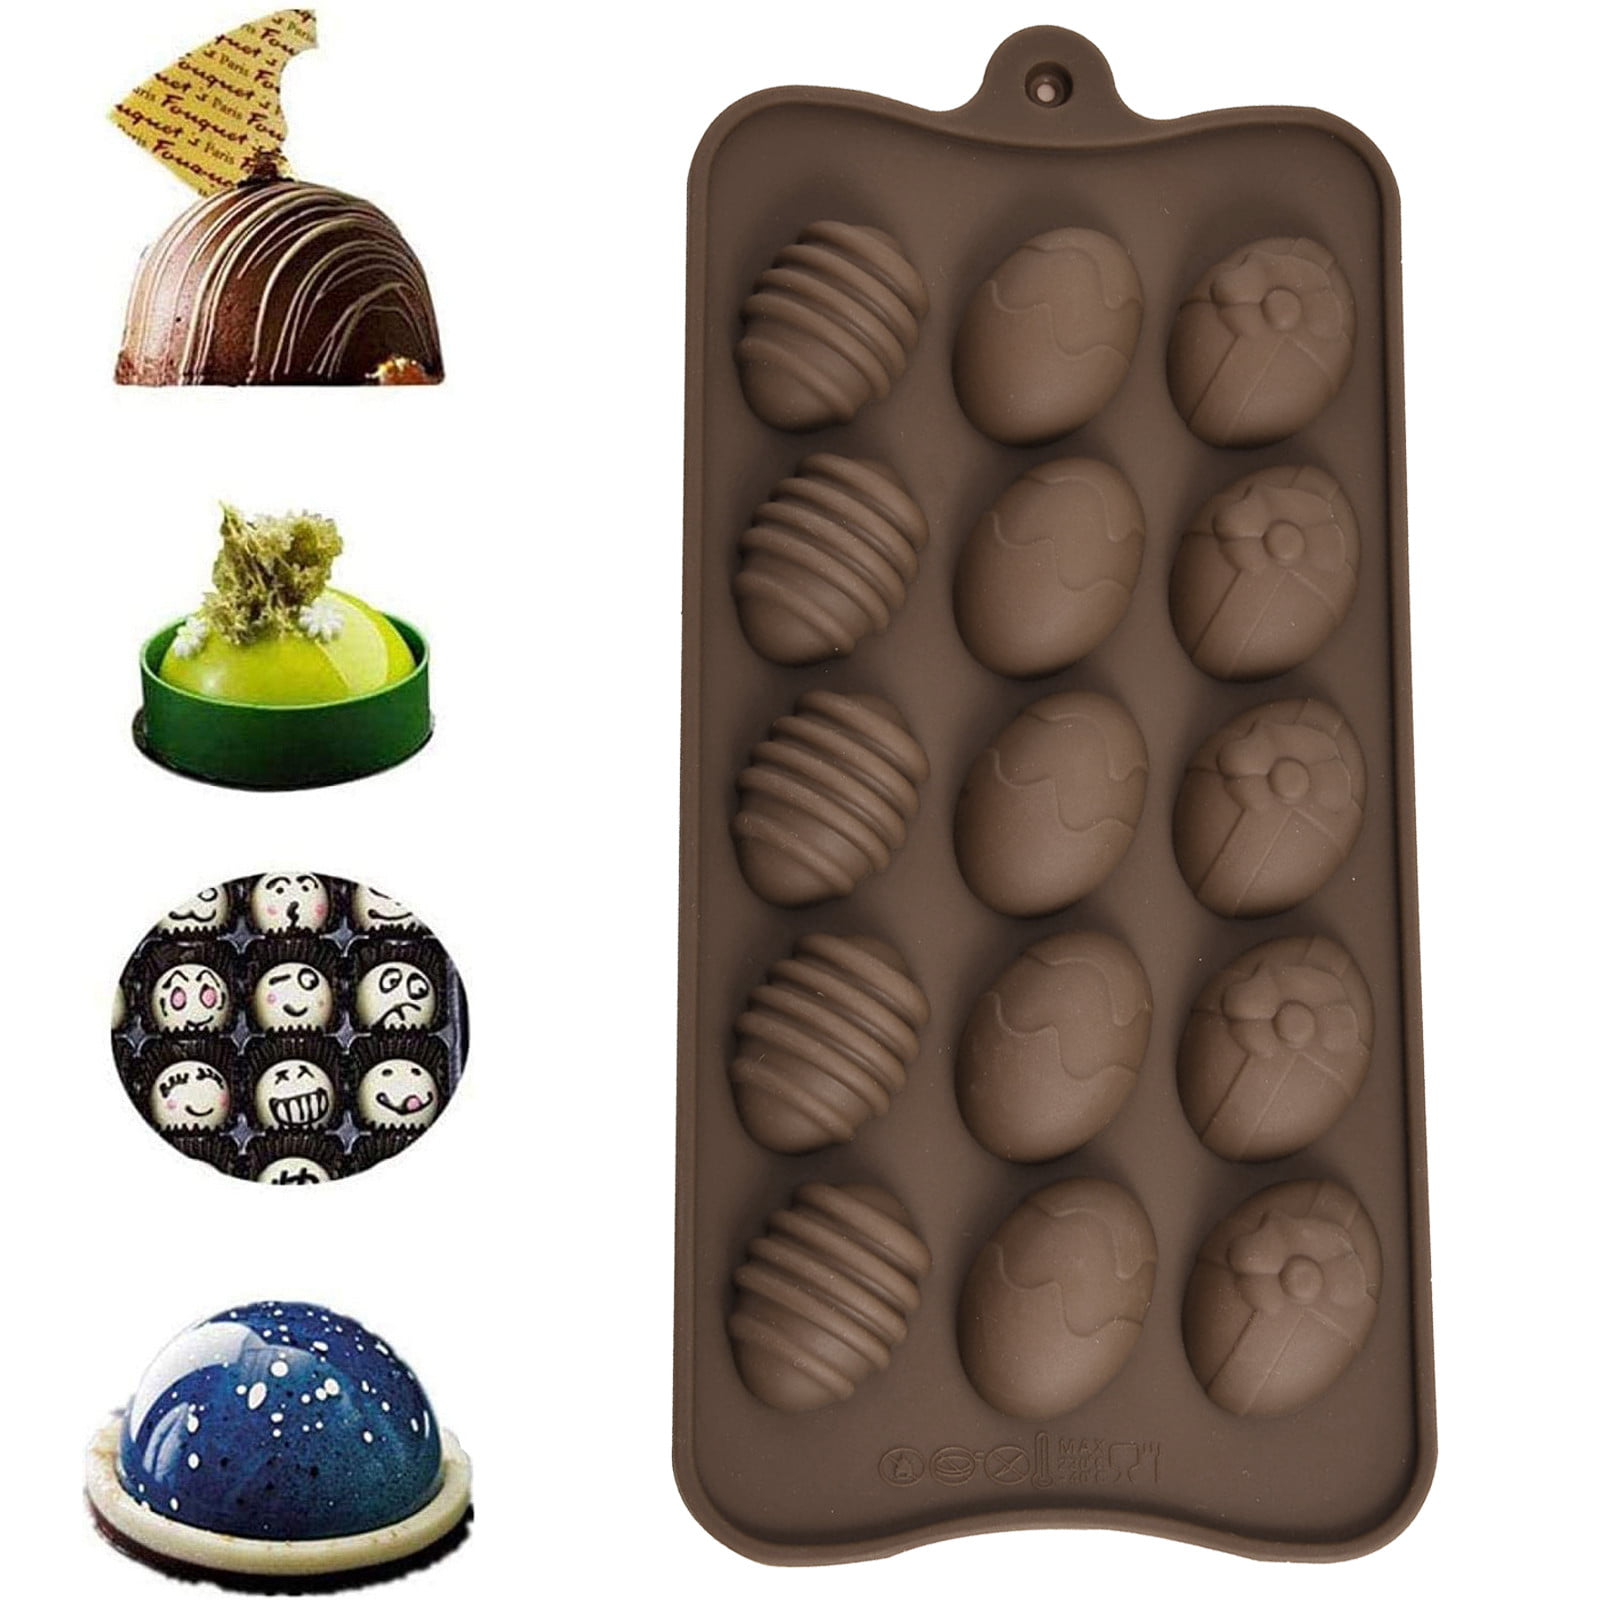 Silicone Cupcake Mold Chocolate Cookie  Candy  Cake  Baking Mould Pan Tools 